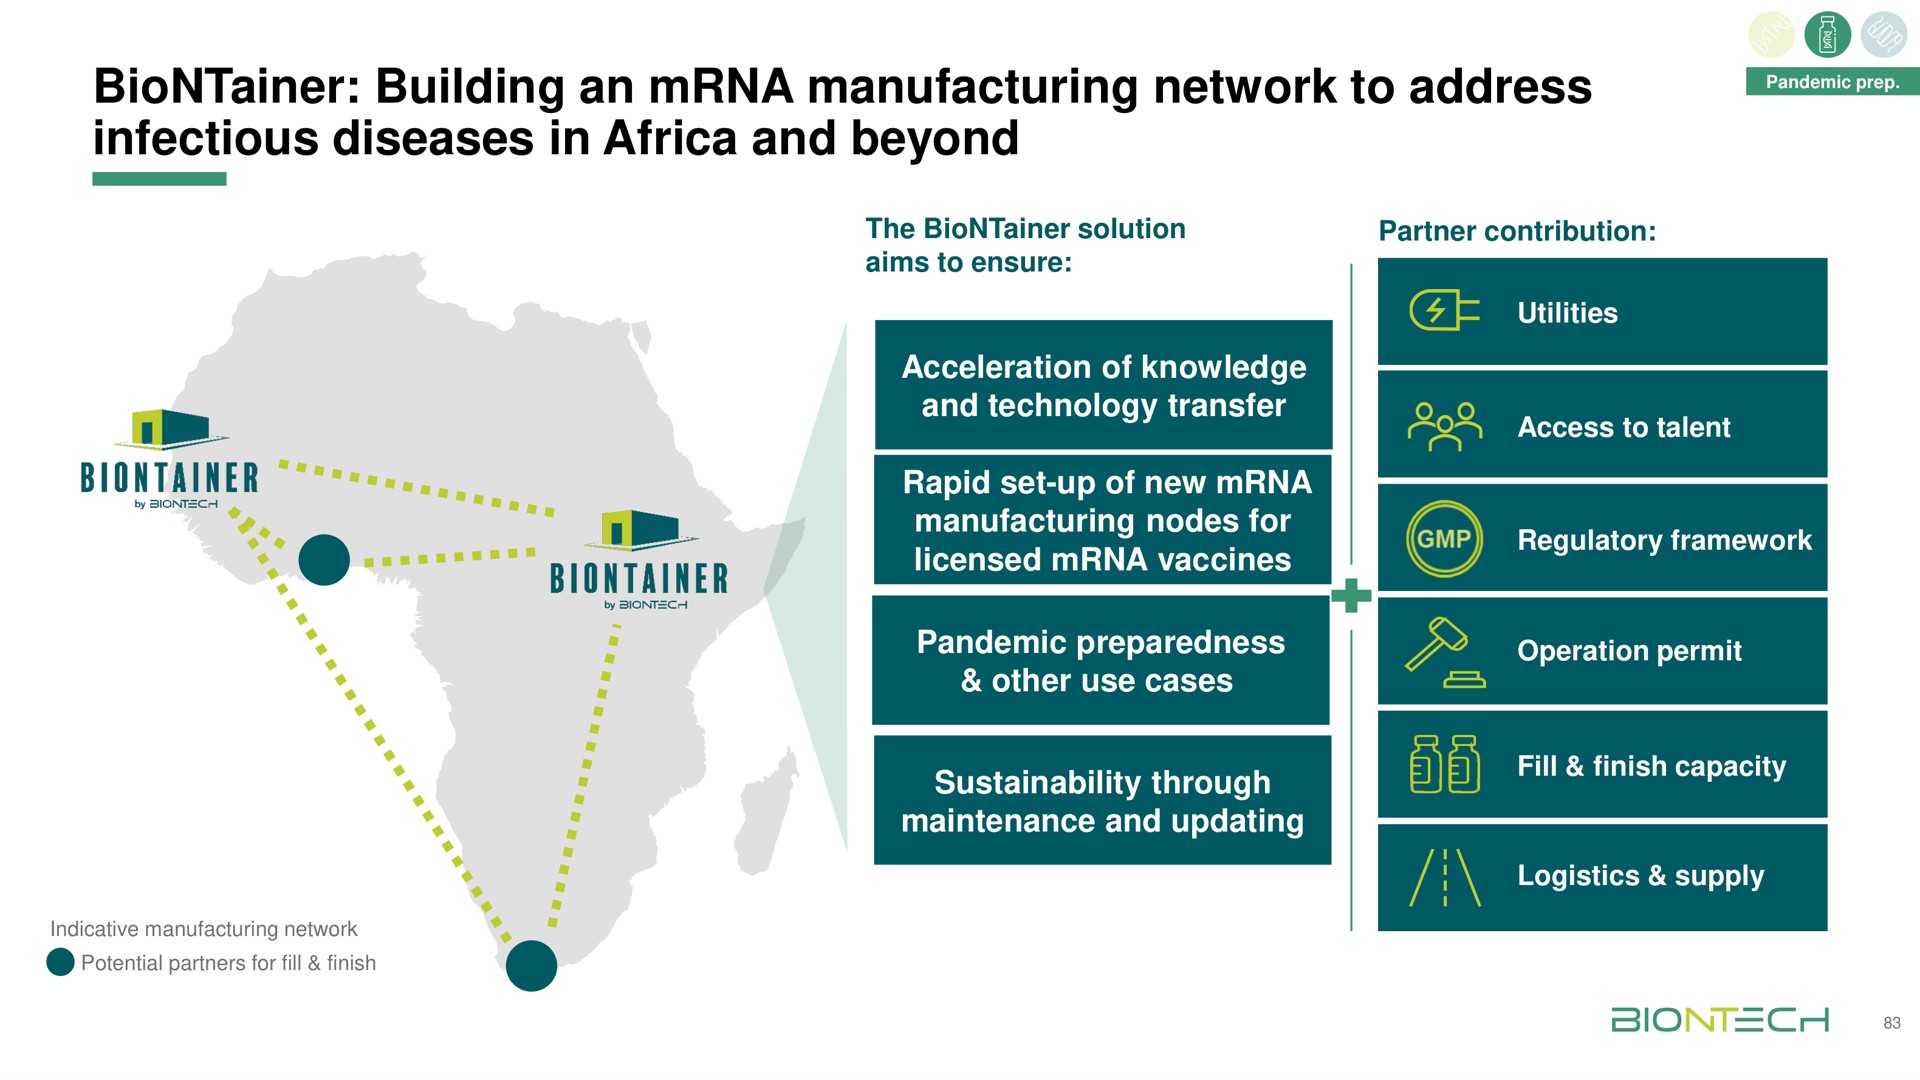 building an manufacturing network to address infectious diseases in and beyond | BioNTech